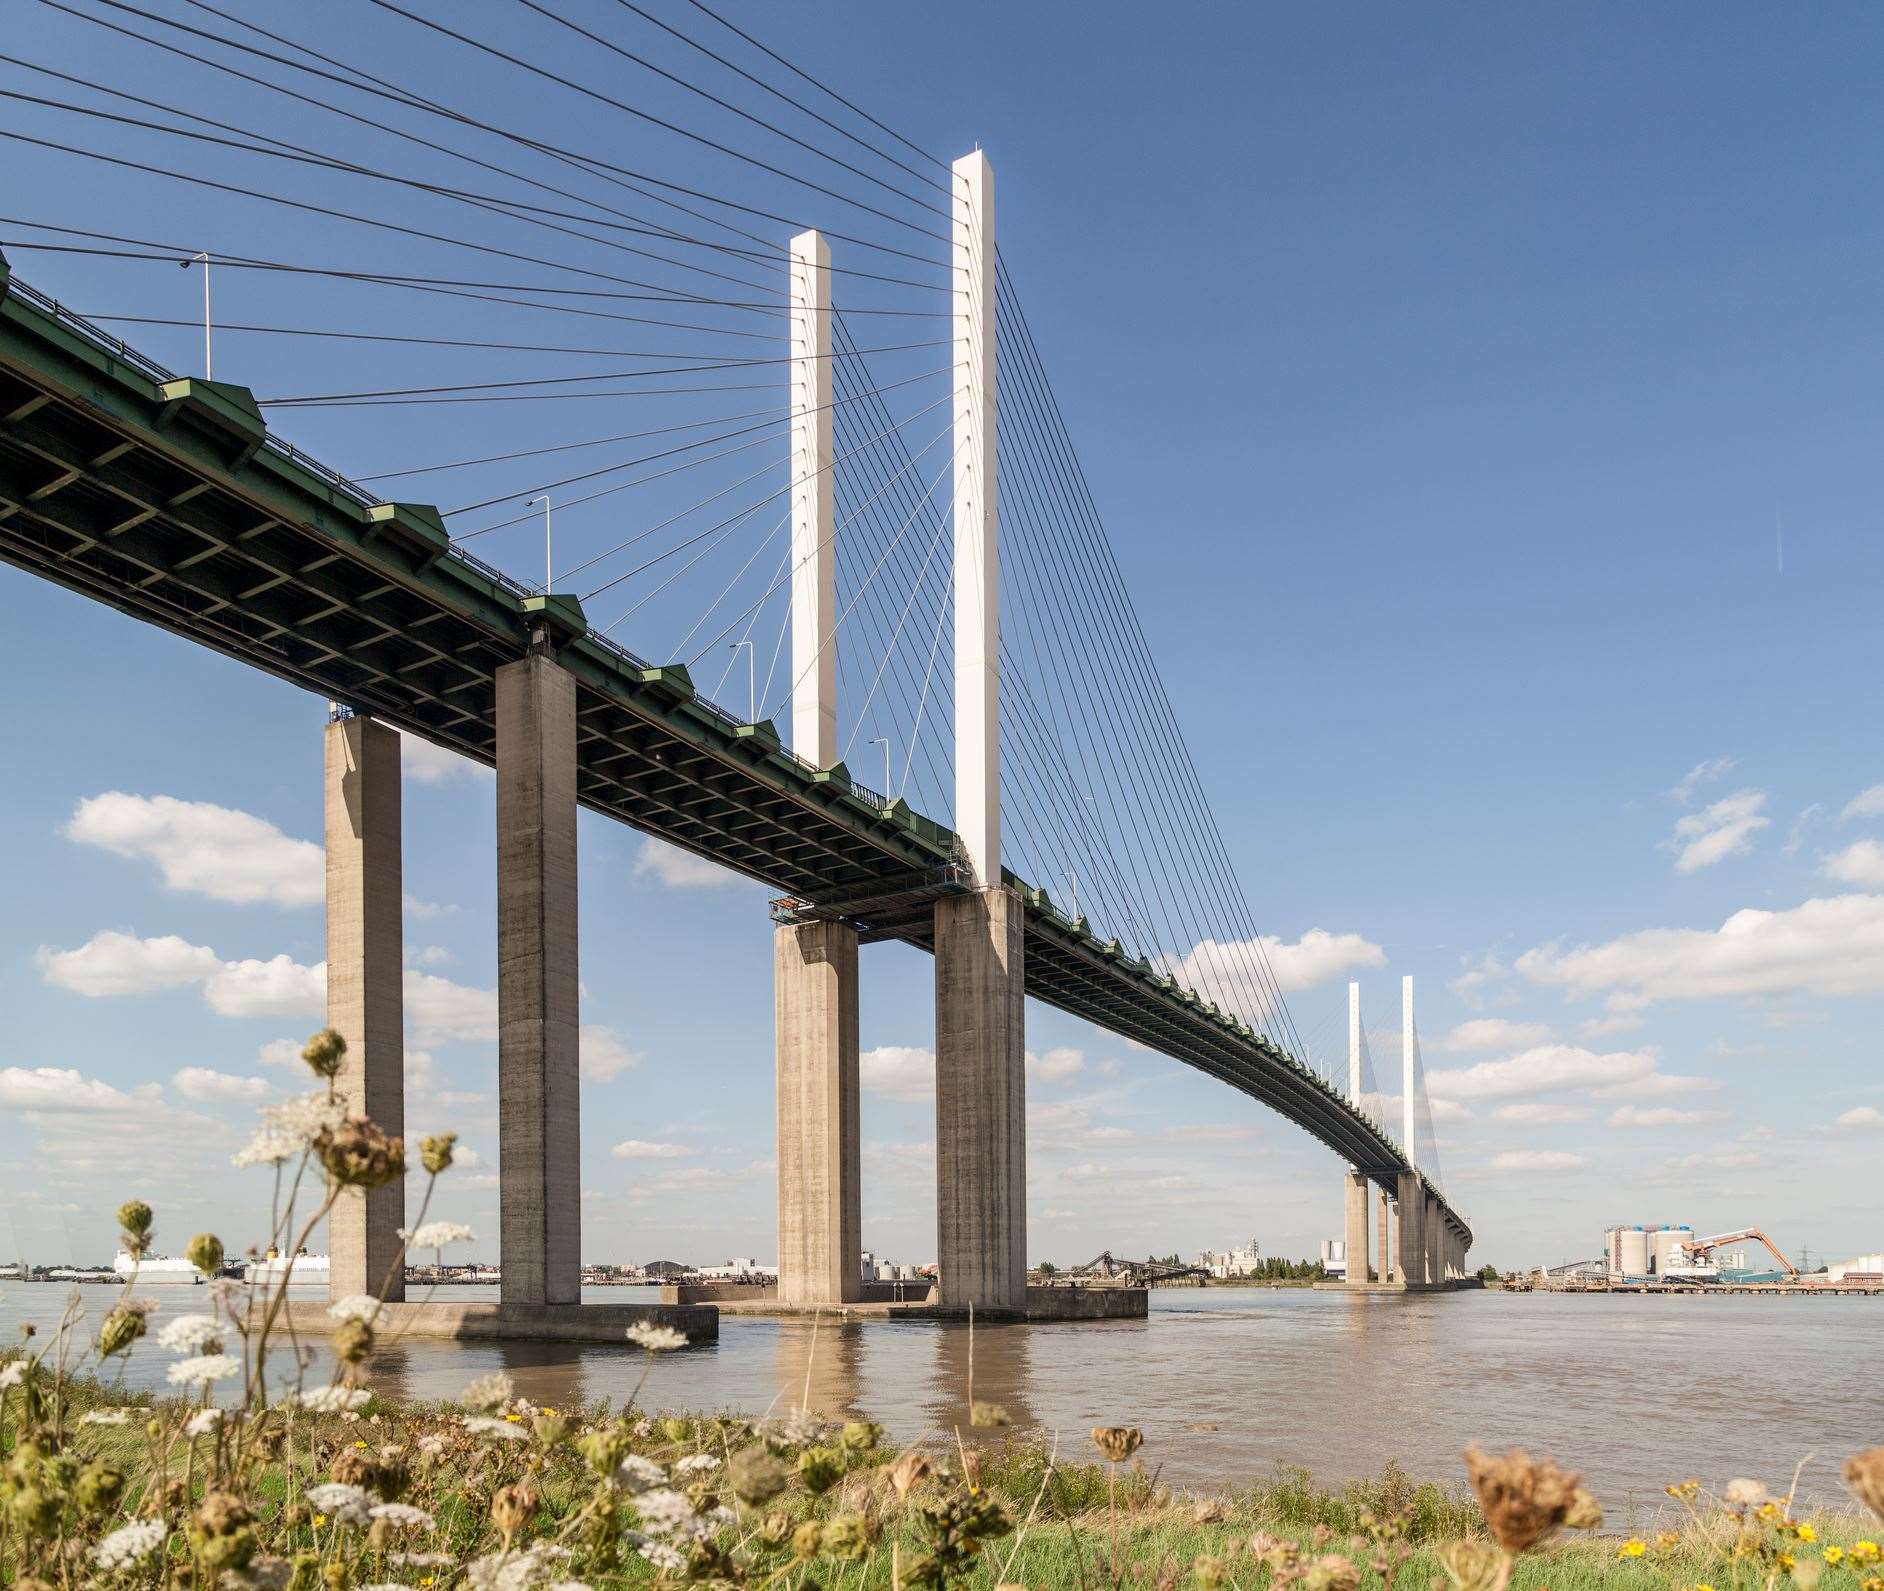 The Dartford Crossing is running over capacity by 45,000 vehicles per day but campaigners say this will be barely impacted by the LTC plan with expected traffic and population growth